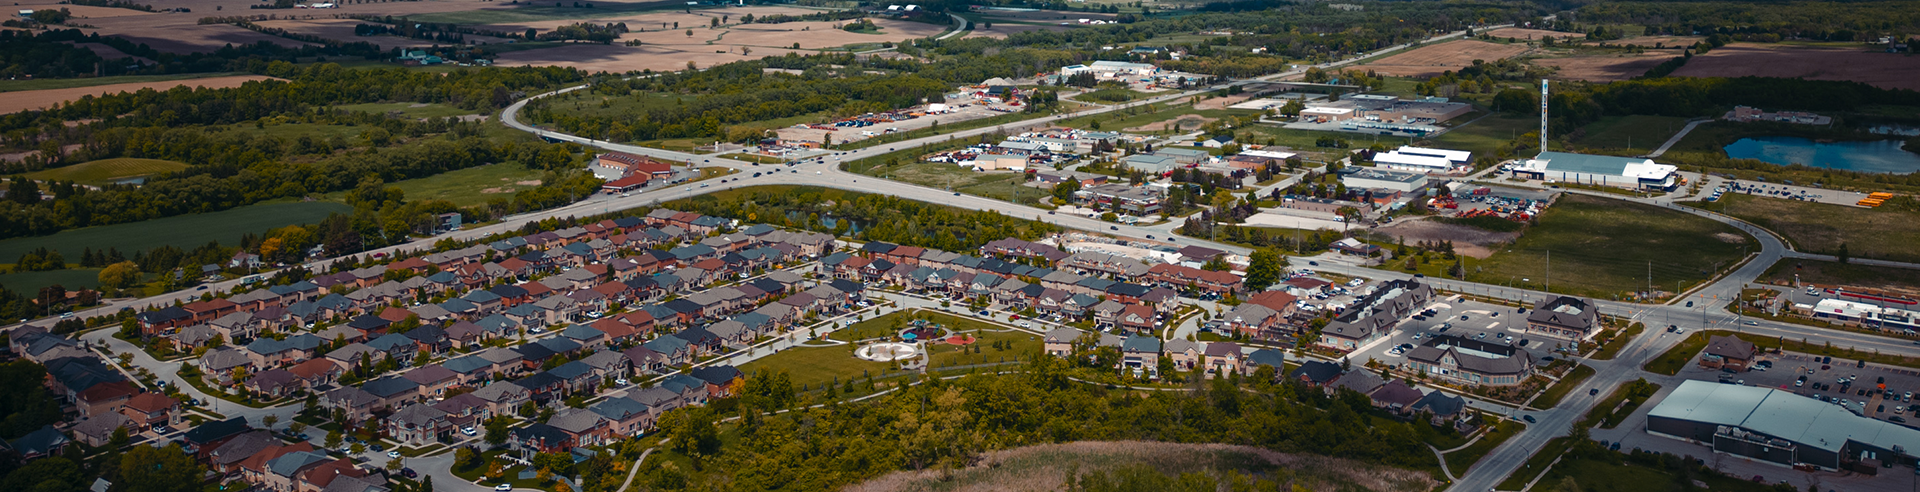 drone image of king city community